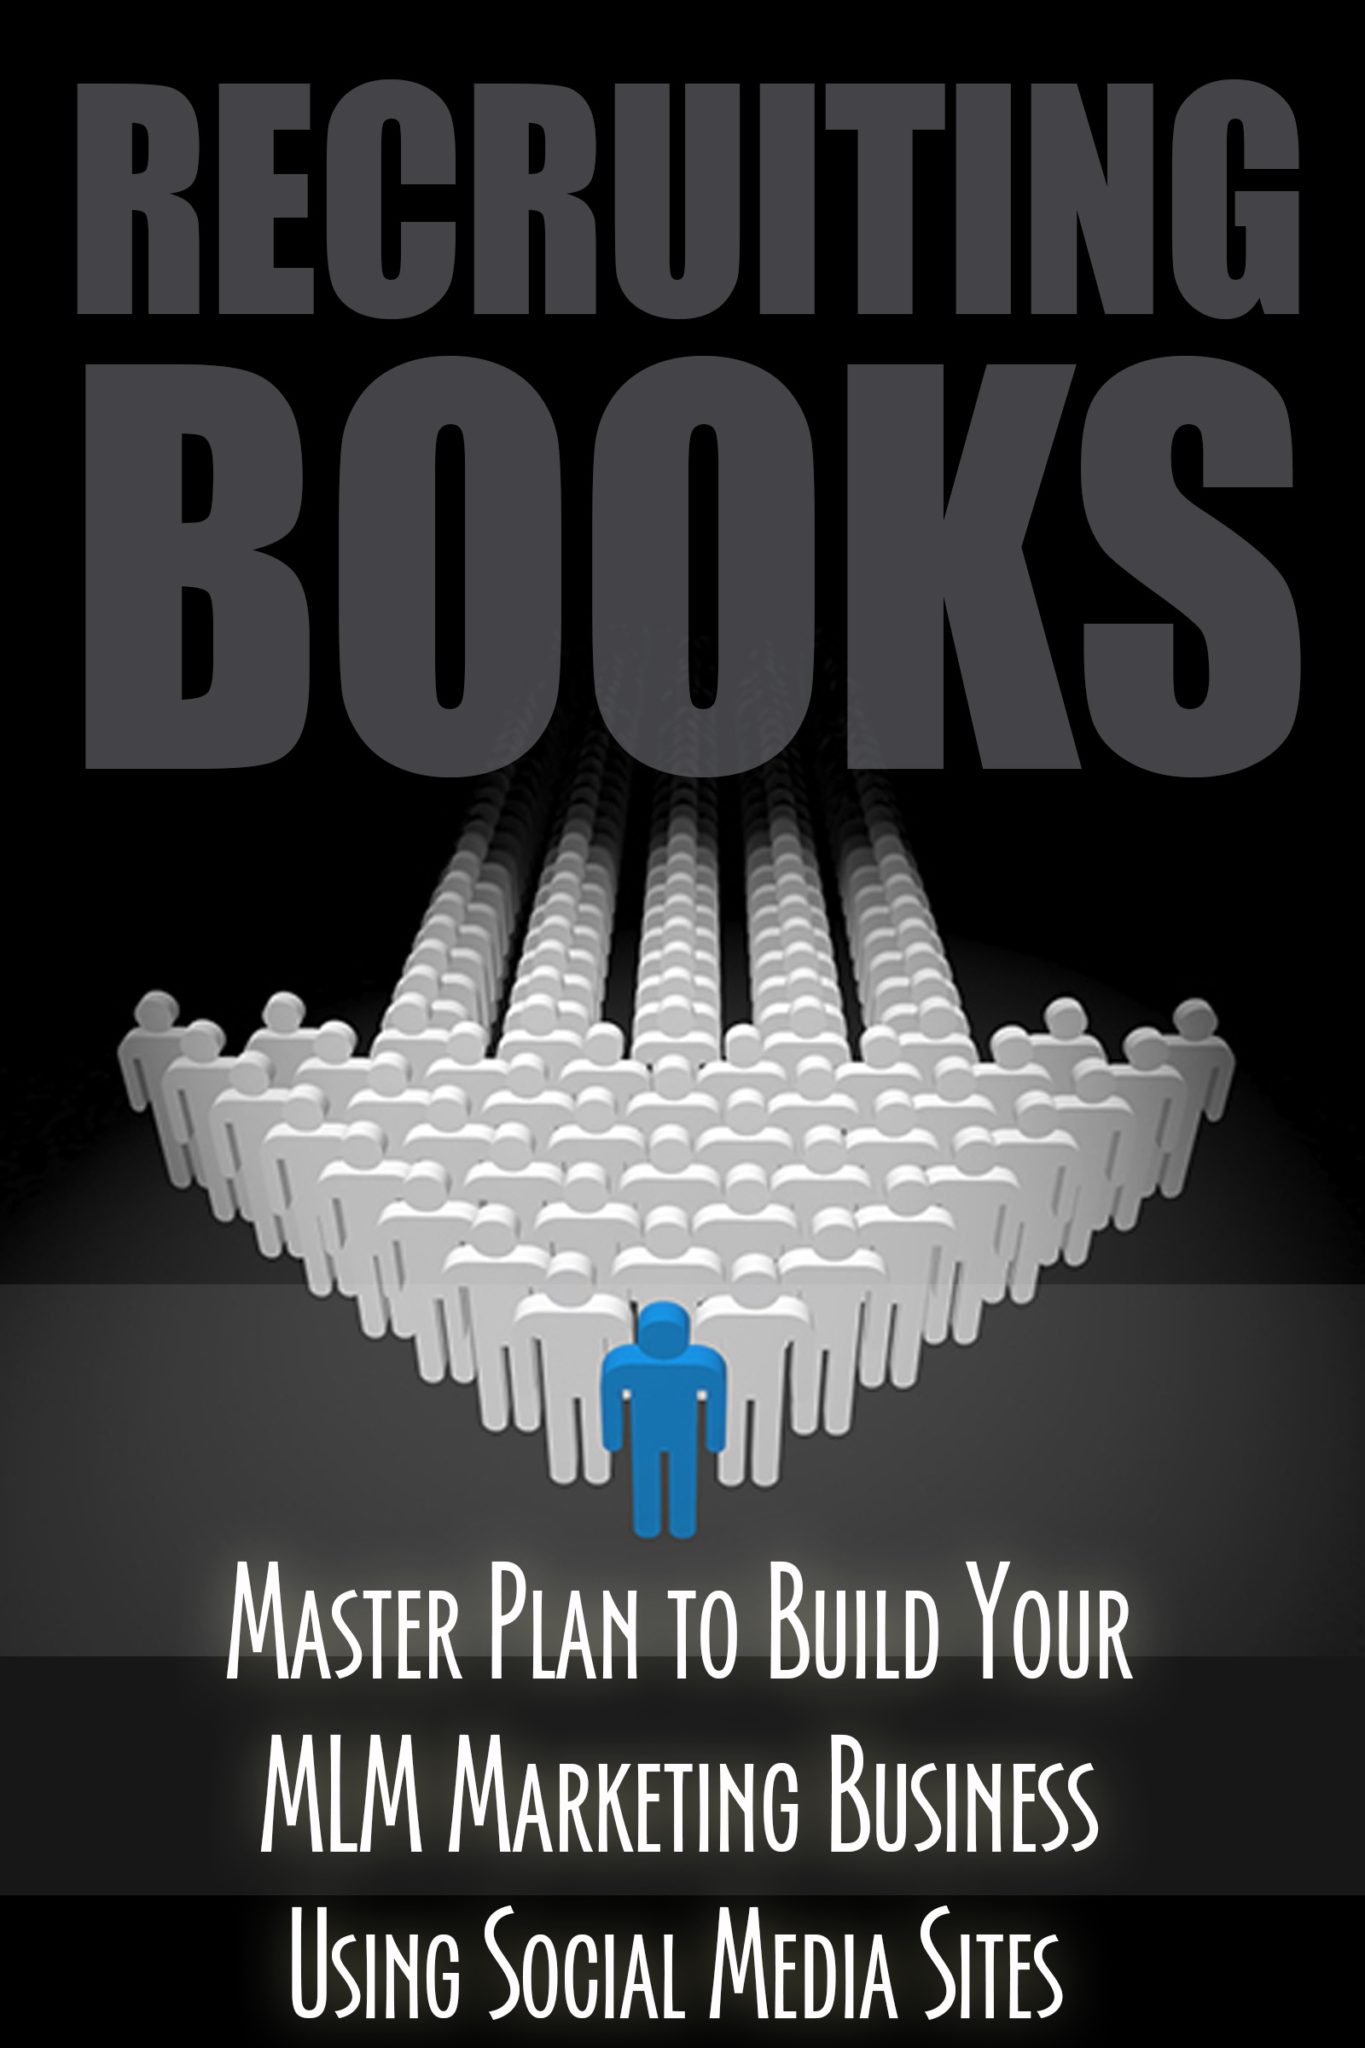 FREE: MLM: Recruiting Books: Marketing and Sales Master Plan to Build Your Multilevel Marketing Business Using Social Media Sites by Brent R